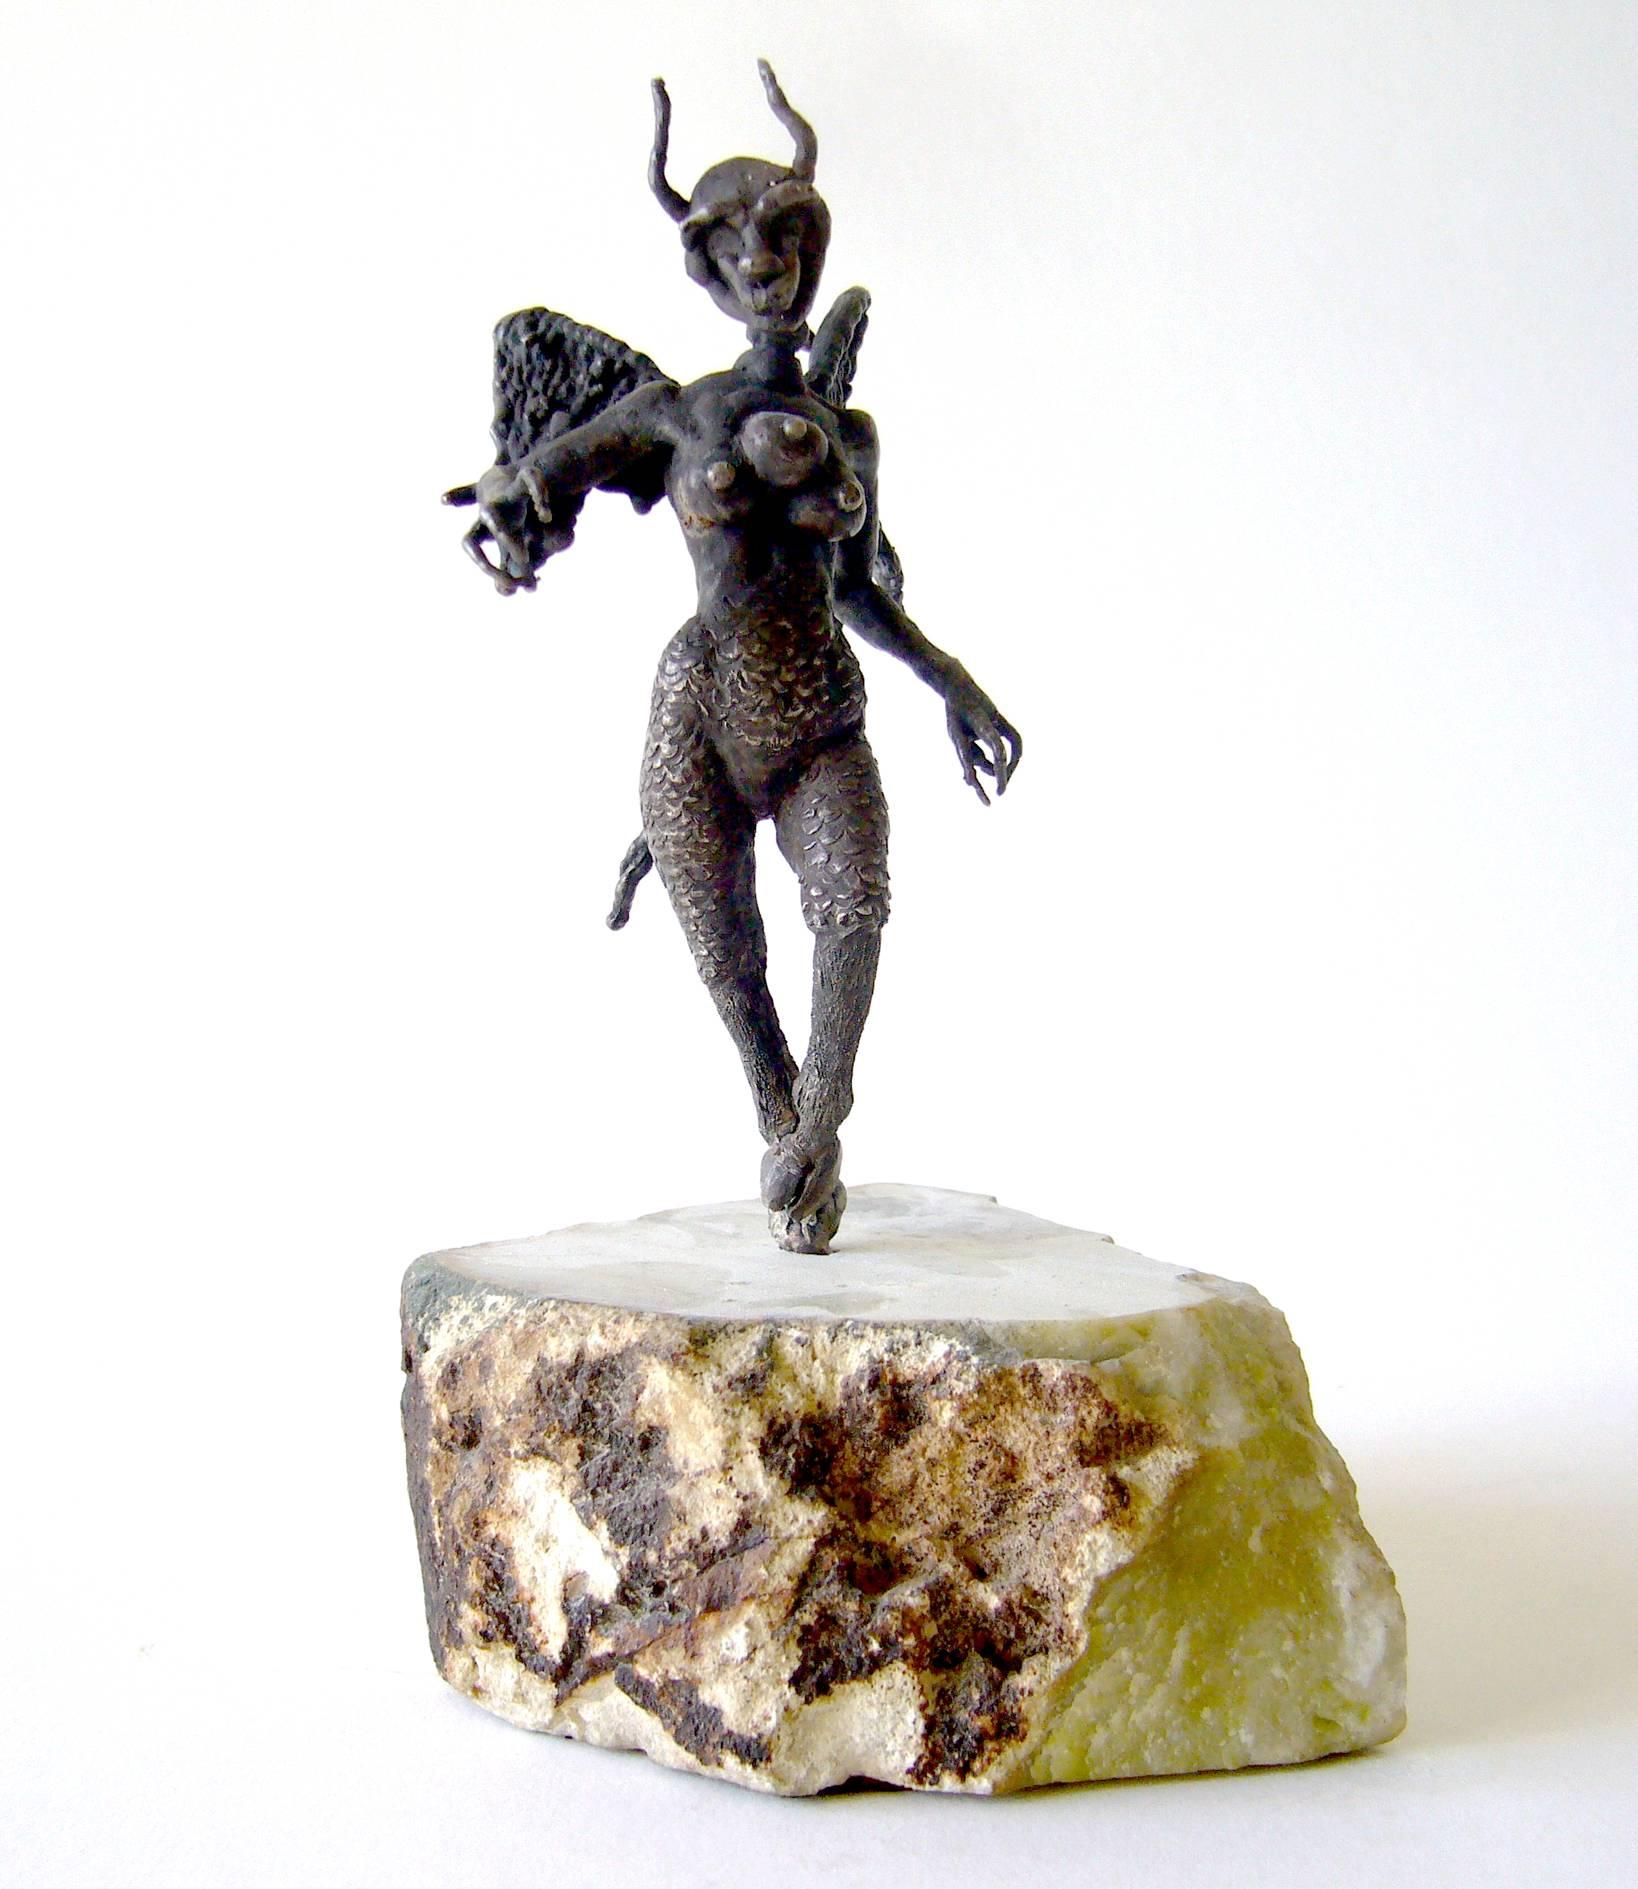 Rare, one of a kind solid silver sculpture made by Cuban born Ernesto Gonzalez Jerez. Sculpture was created with his torch style method, which he is most known for. Piece stands 6.5 inches height including its marble base and is unsigned. Acquired